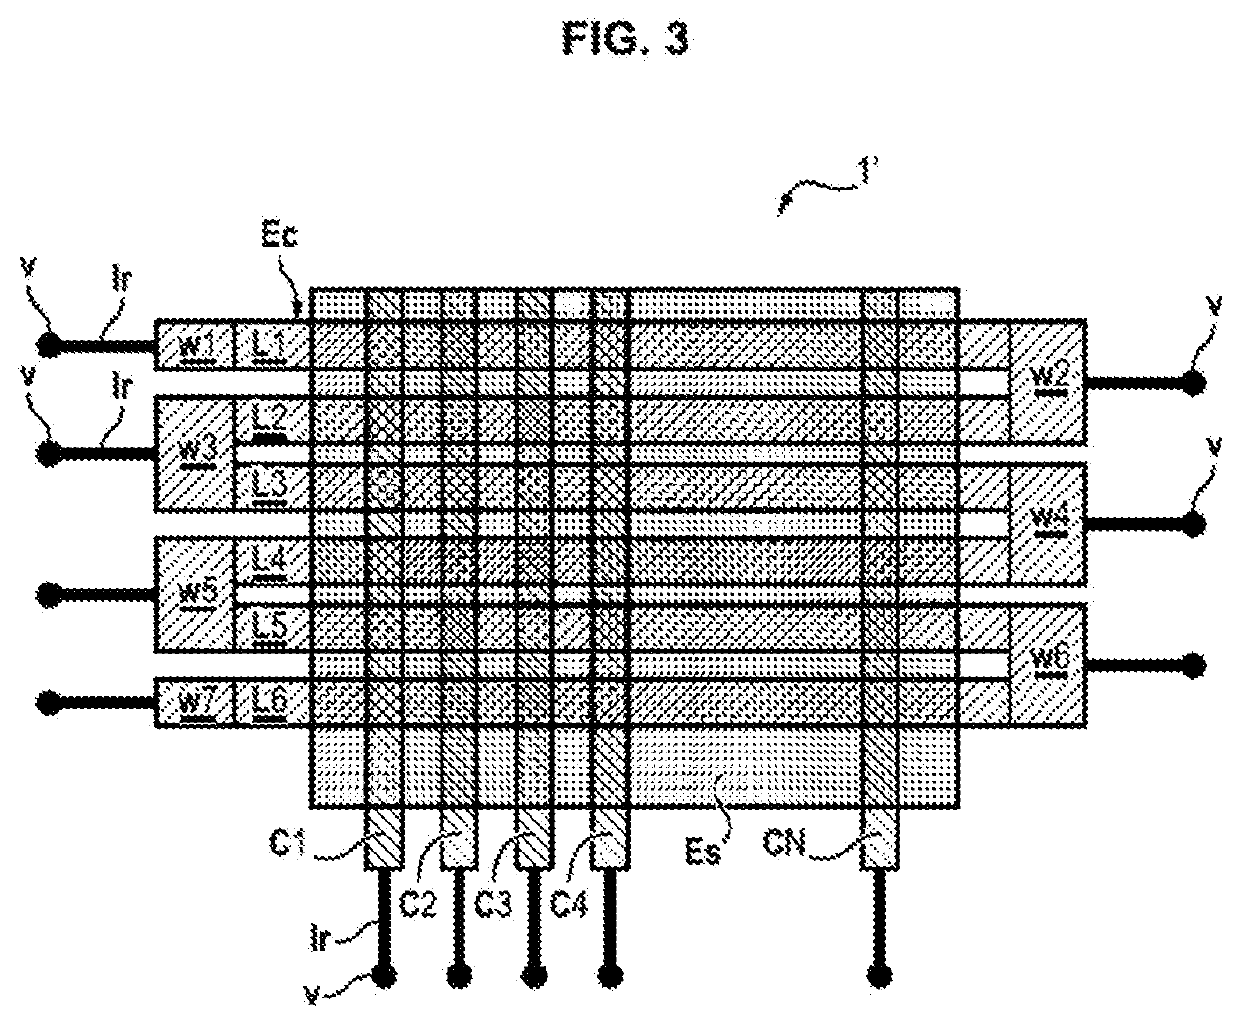 Pixel array of a thermal pattern sensor, sensor associates with coil heating lines